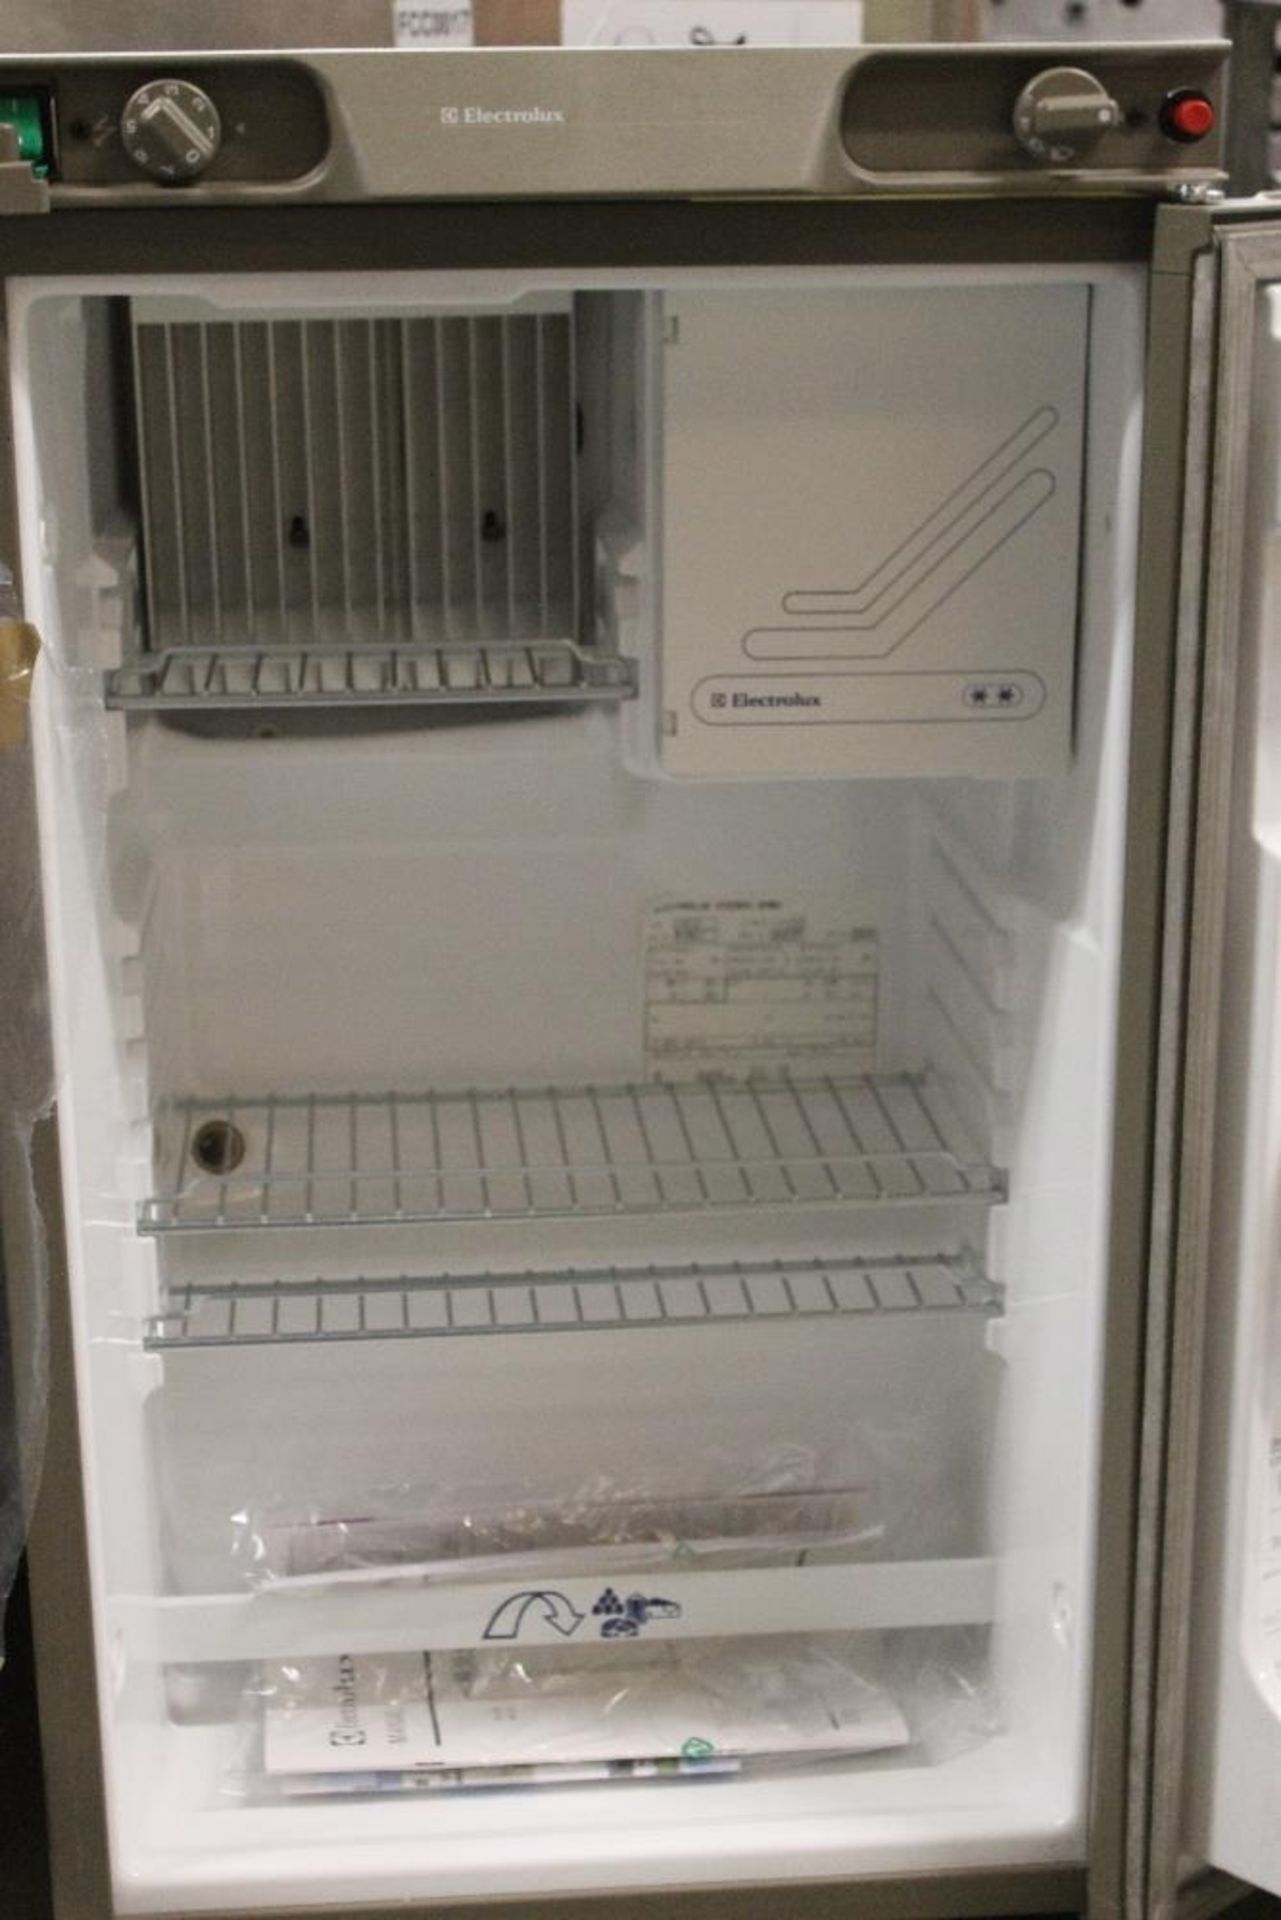 Electrolux LPG in Fridge -RM4230S – with manual - Image 2 of 3